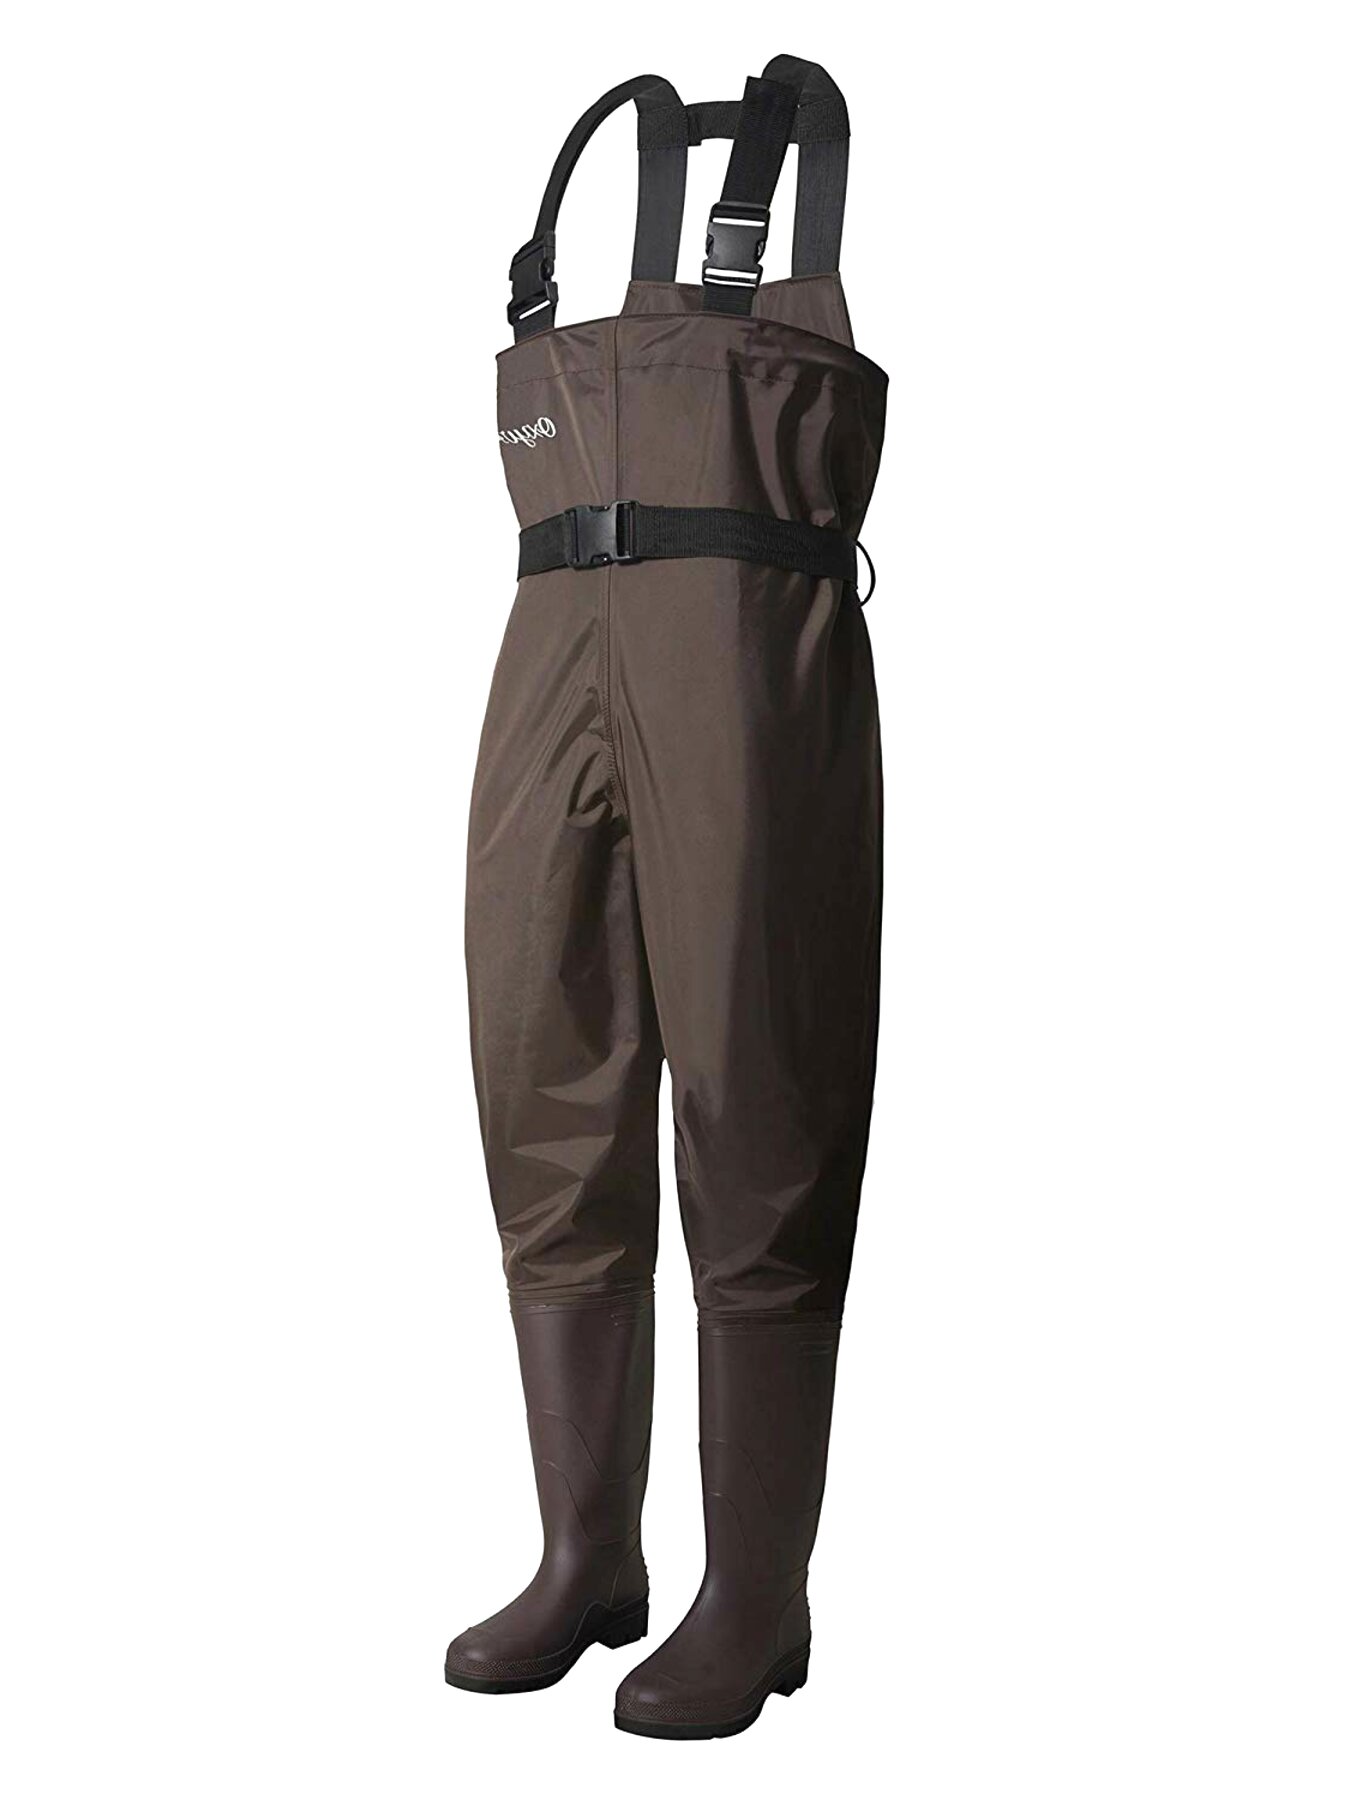 Chest Waders for sale in UK | 79 used Chest Waders